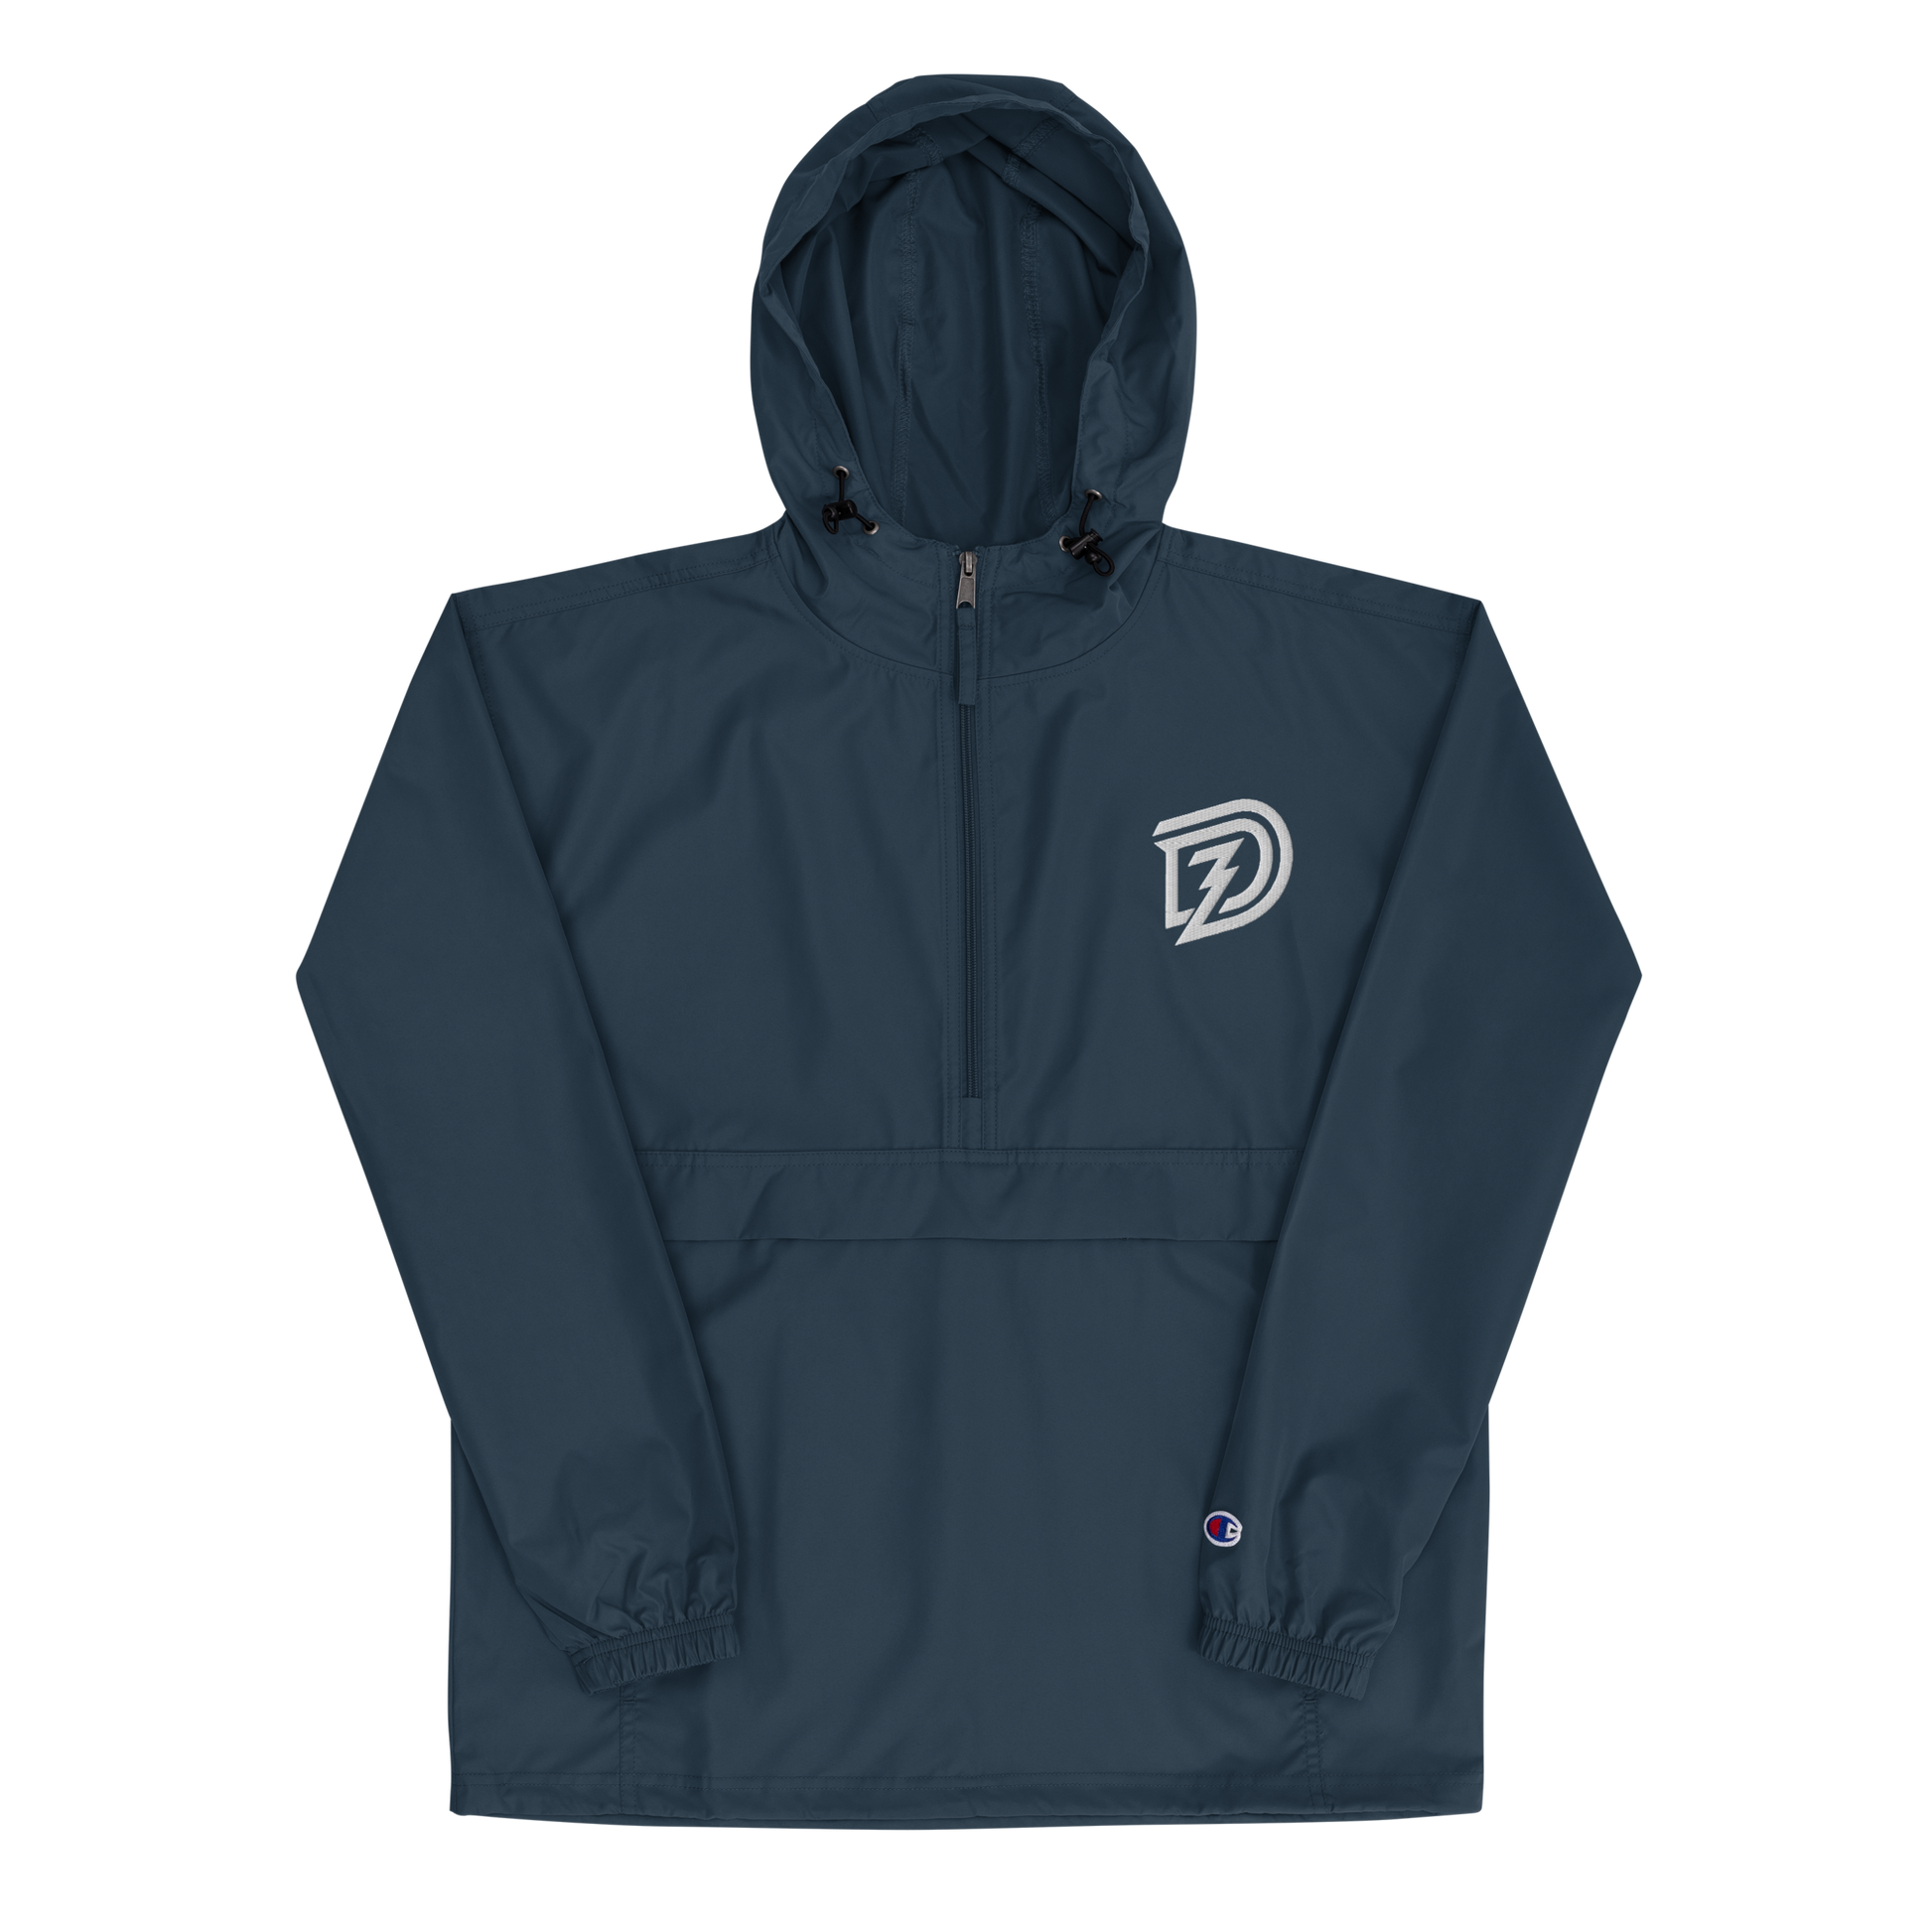 Embroidered Champion Packable Jacket in Navy with hood up